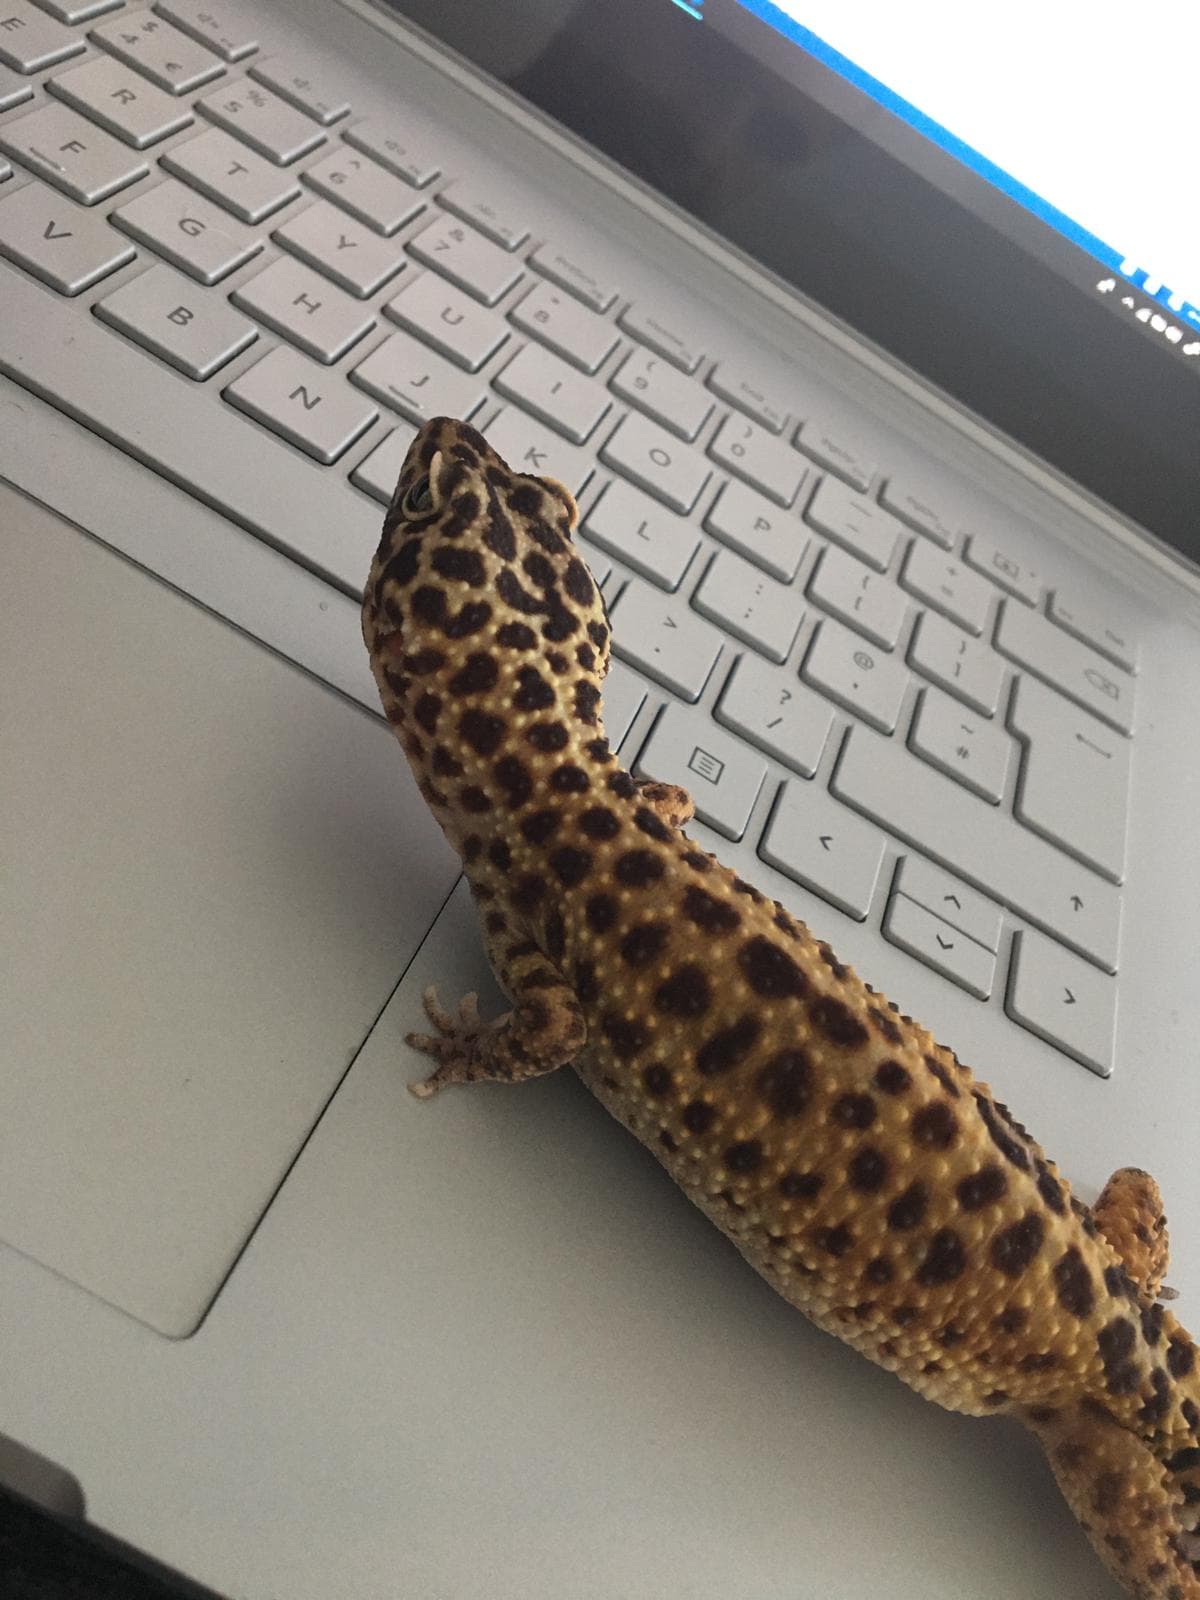 Animal Management lecturer Stacey has a leopard gecko while remote working